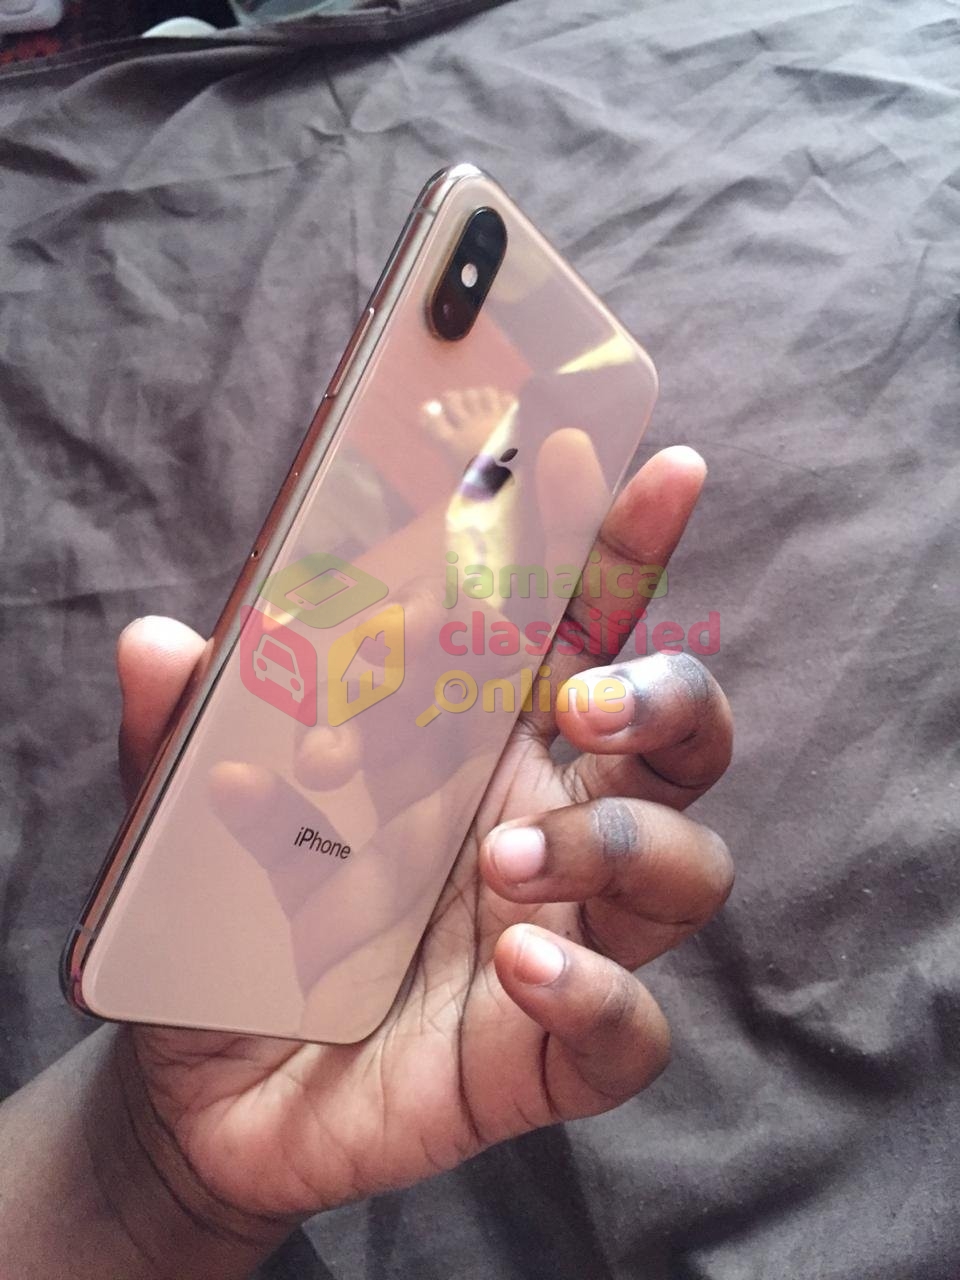 IPhone XS Max 256 Gb Clean Gold for sale in Kingston Kingston St Andrew